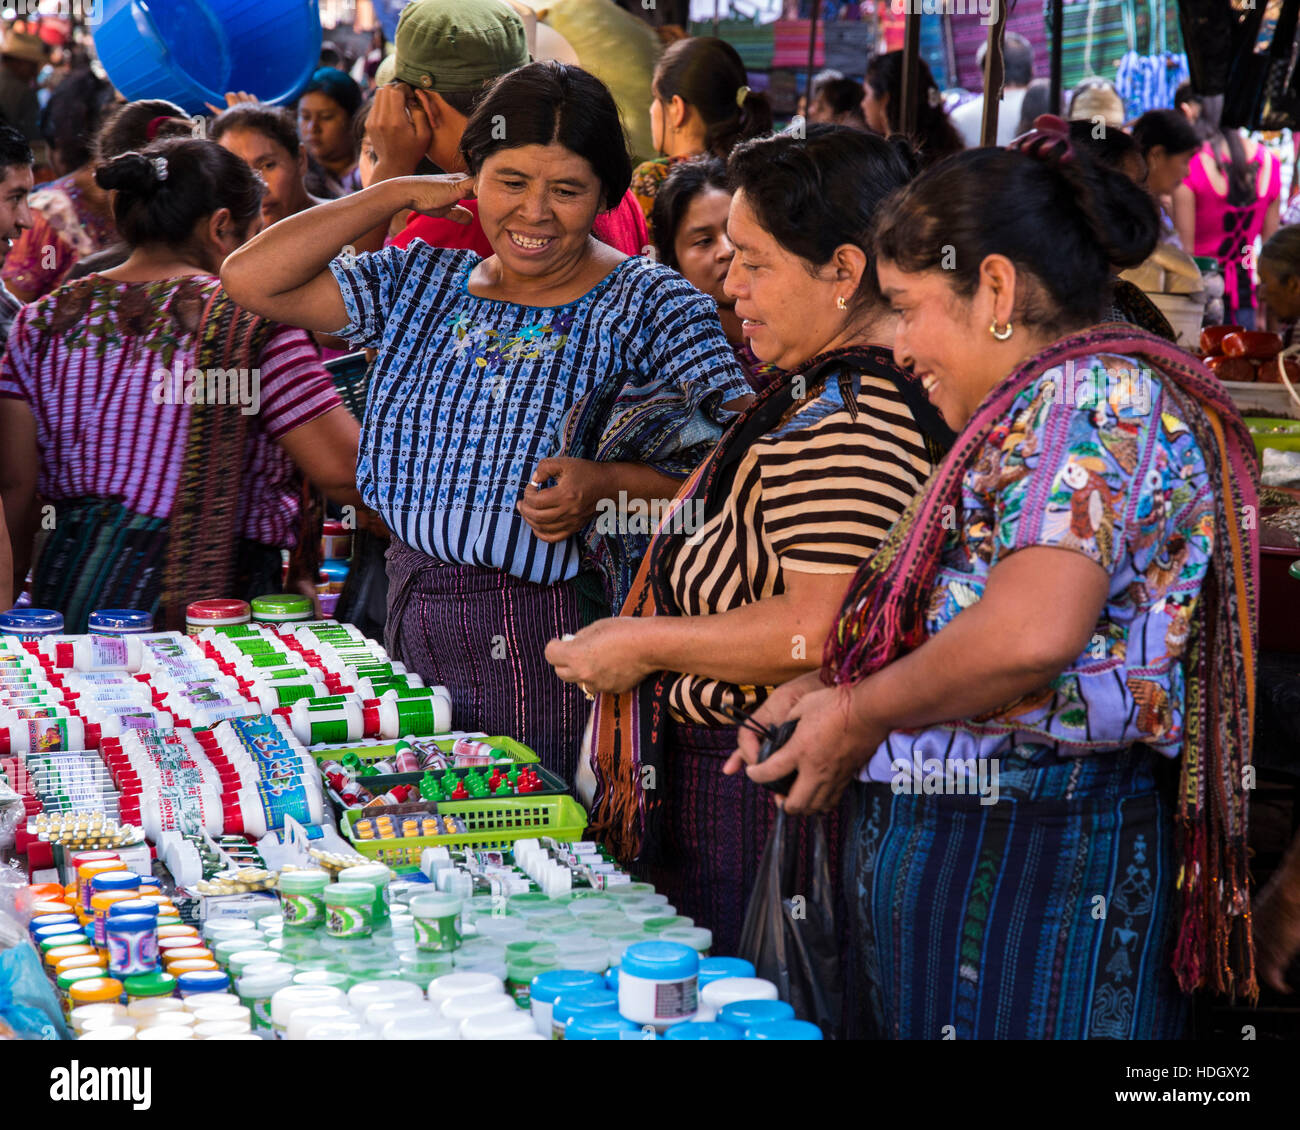 Three middle-aged adult Mayan women in traditional dress enjoy shopping at the open market in Santiago Atitlan, Guatemala. Stock Photo